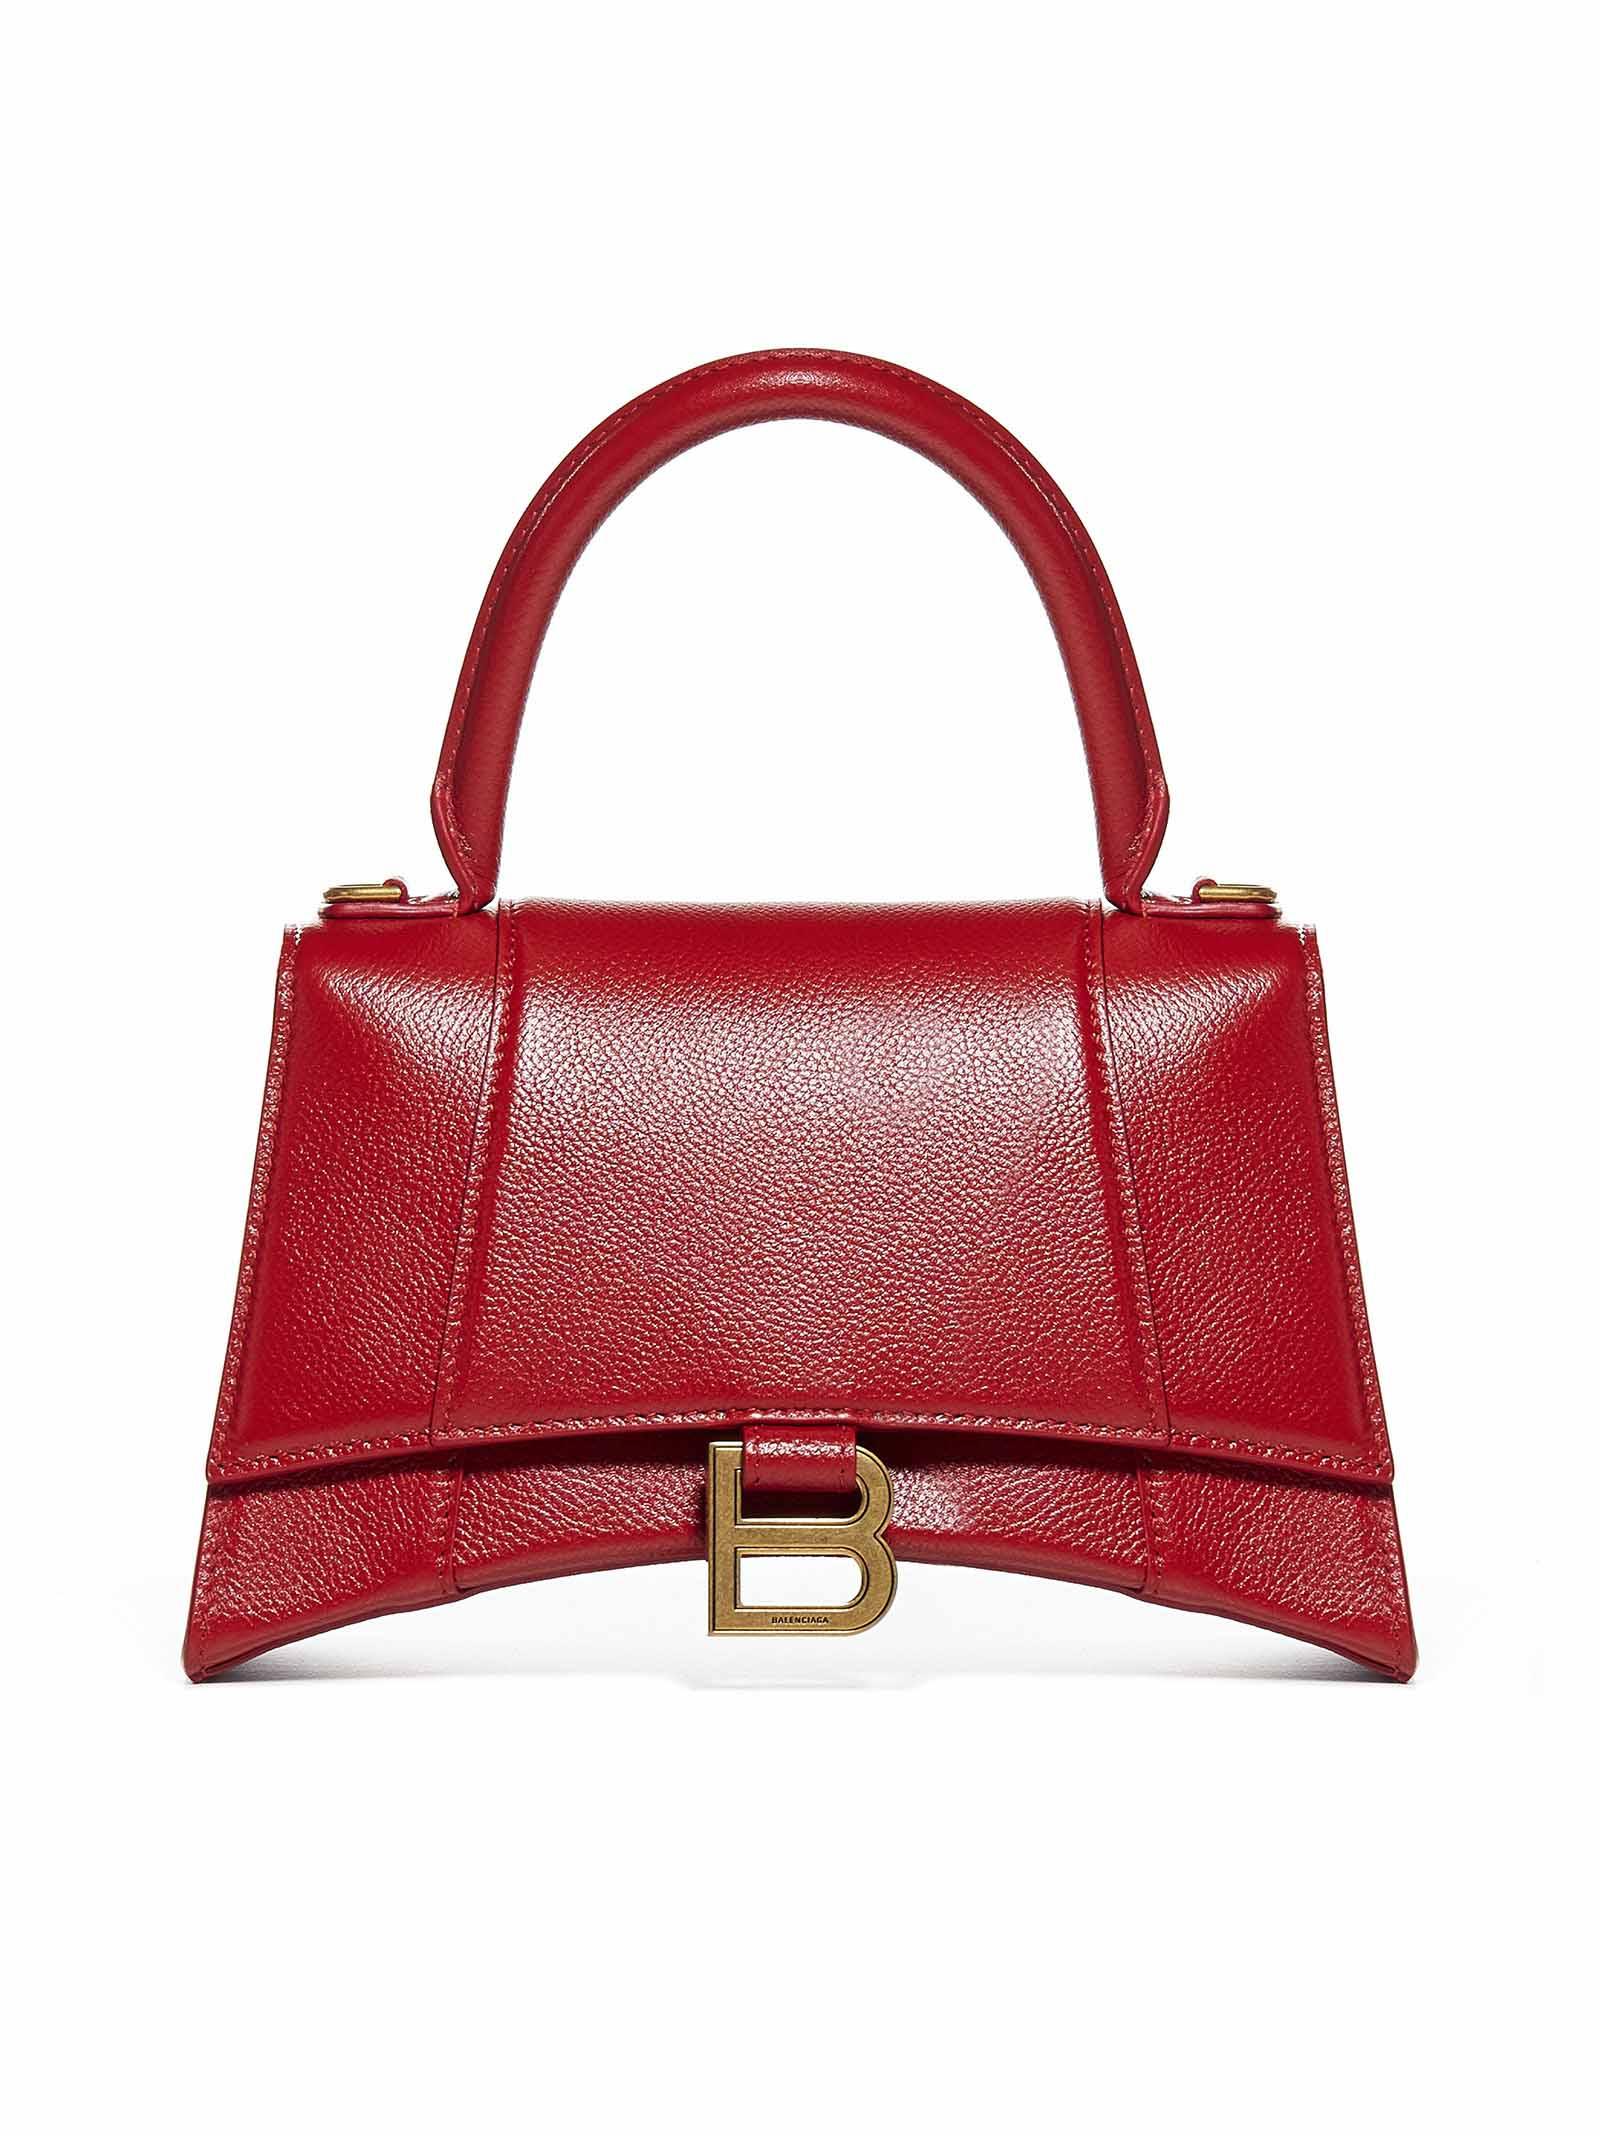 Balenciaga Hourglass Small Top Handle Bag in Red